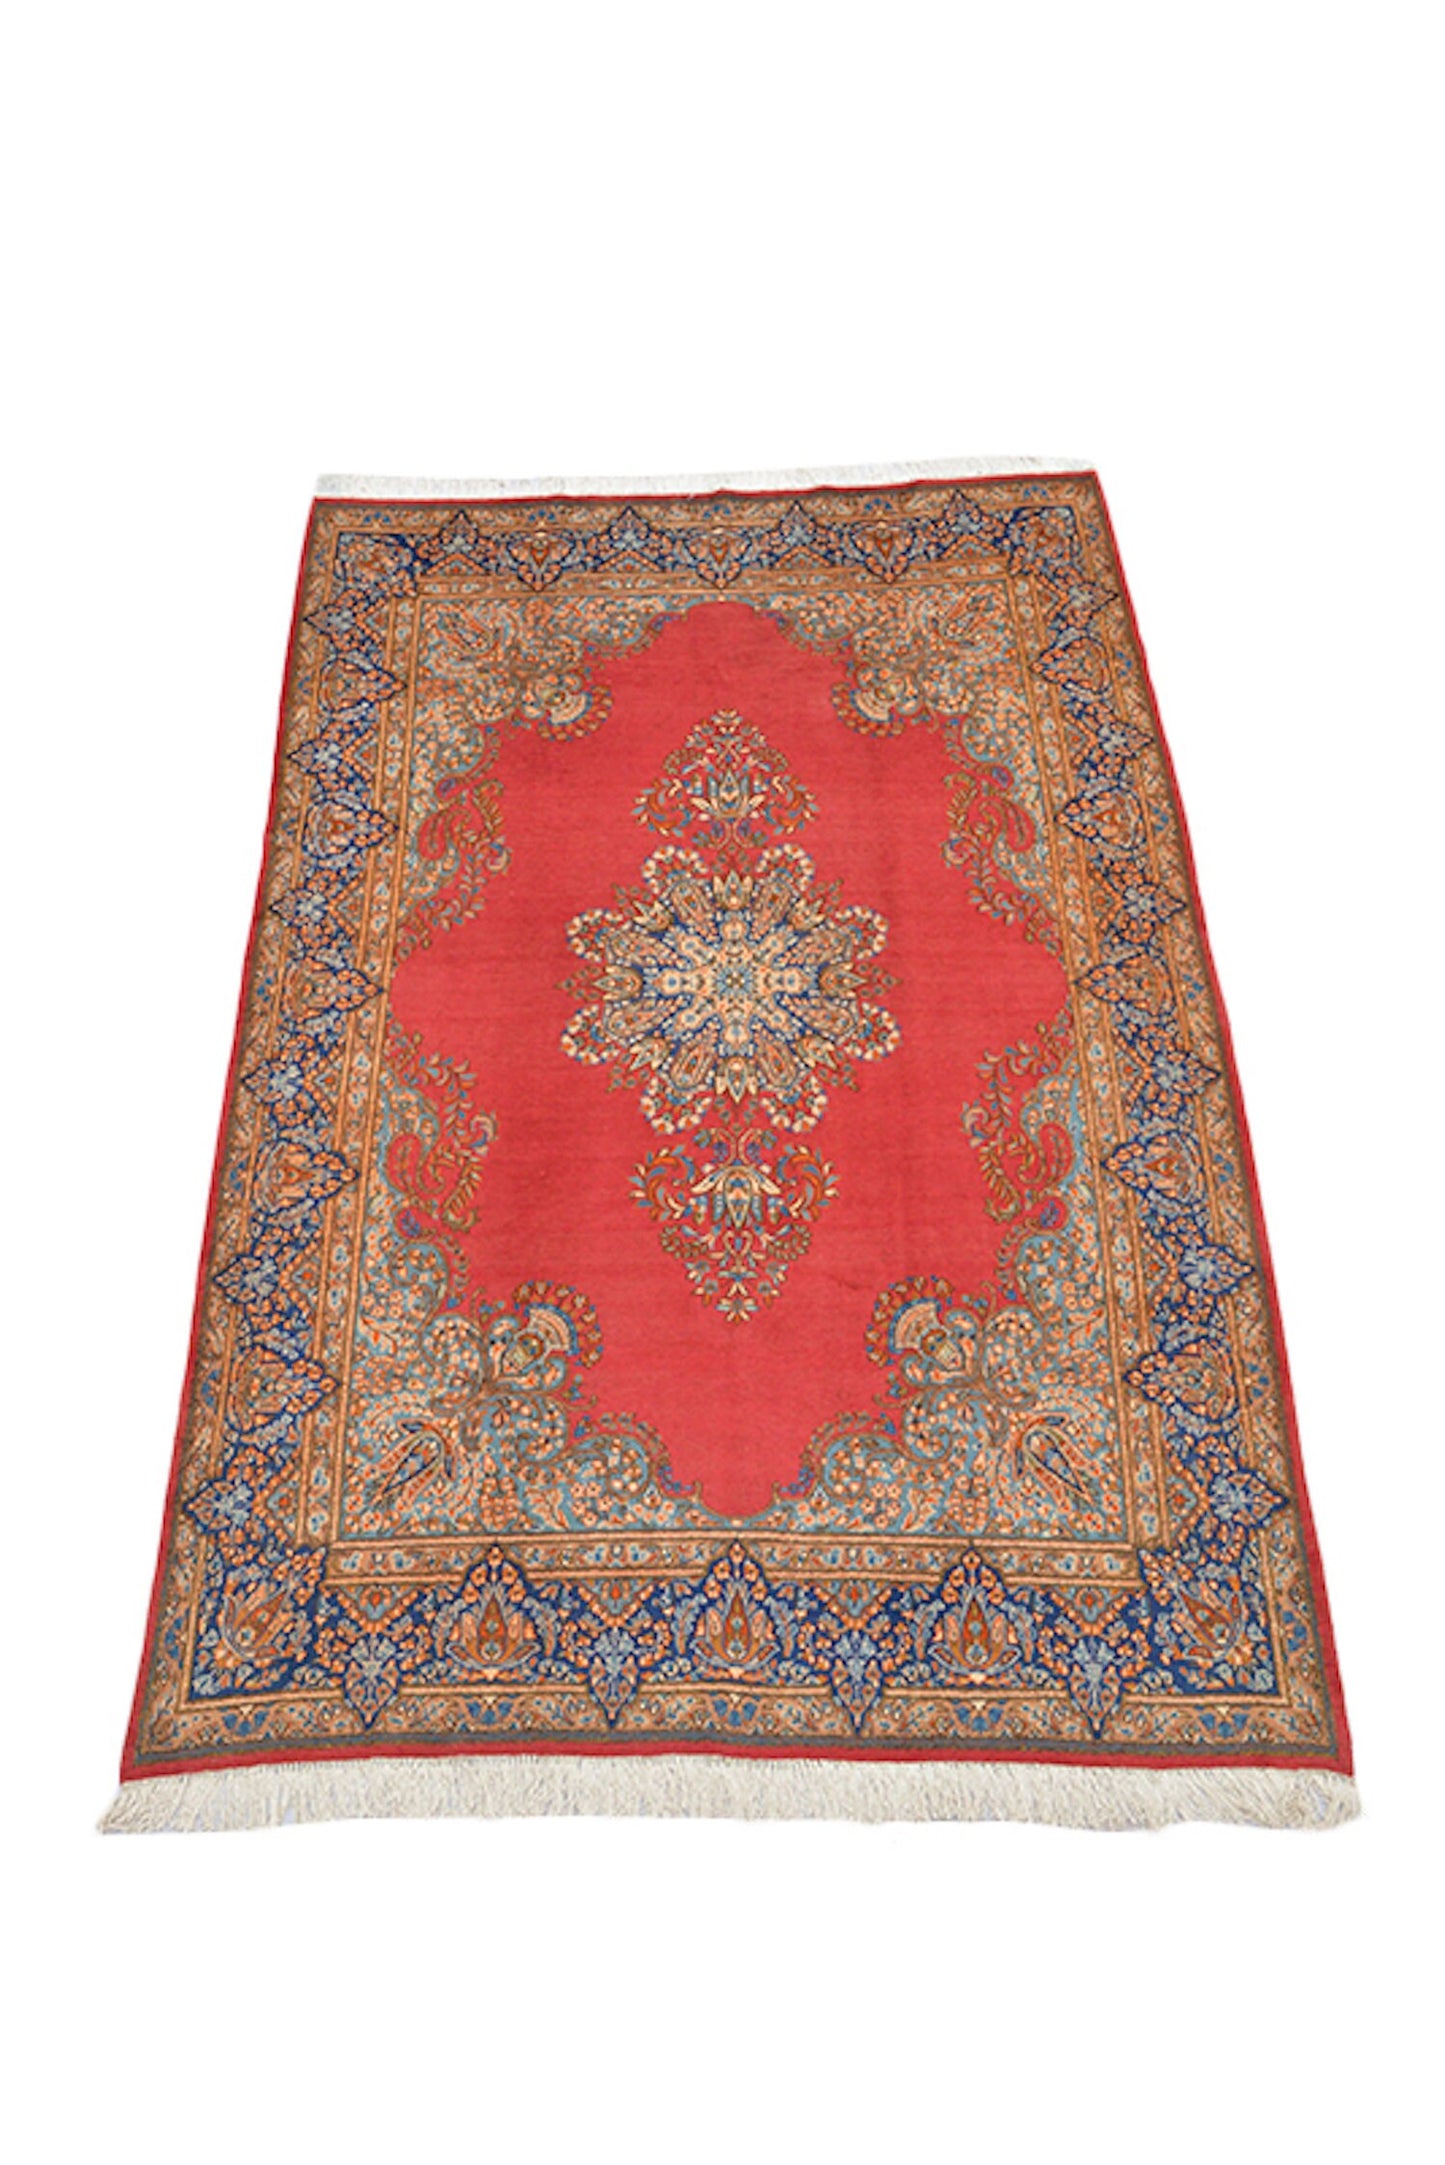 Antique Caucasian Rug, 8 x 11 Feet, Red Central Medallion, Oriental Persian Style, Wool Luxury Large Area Rug